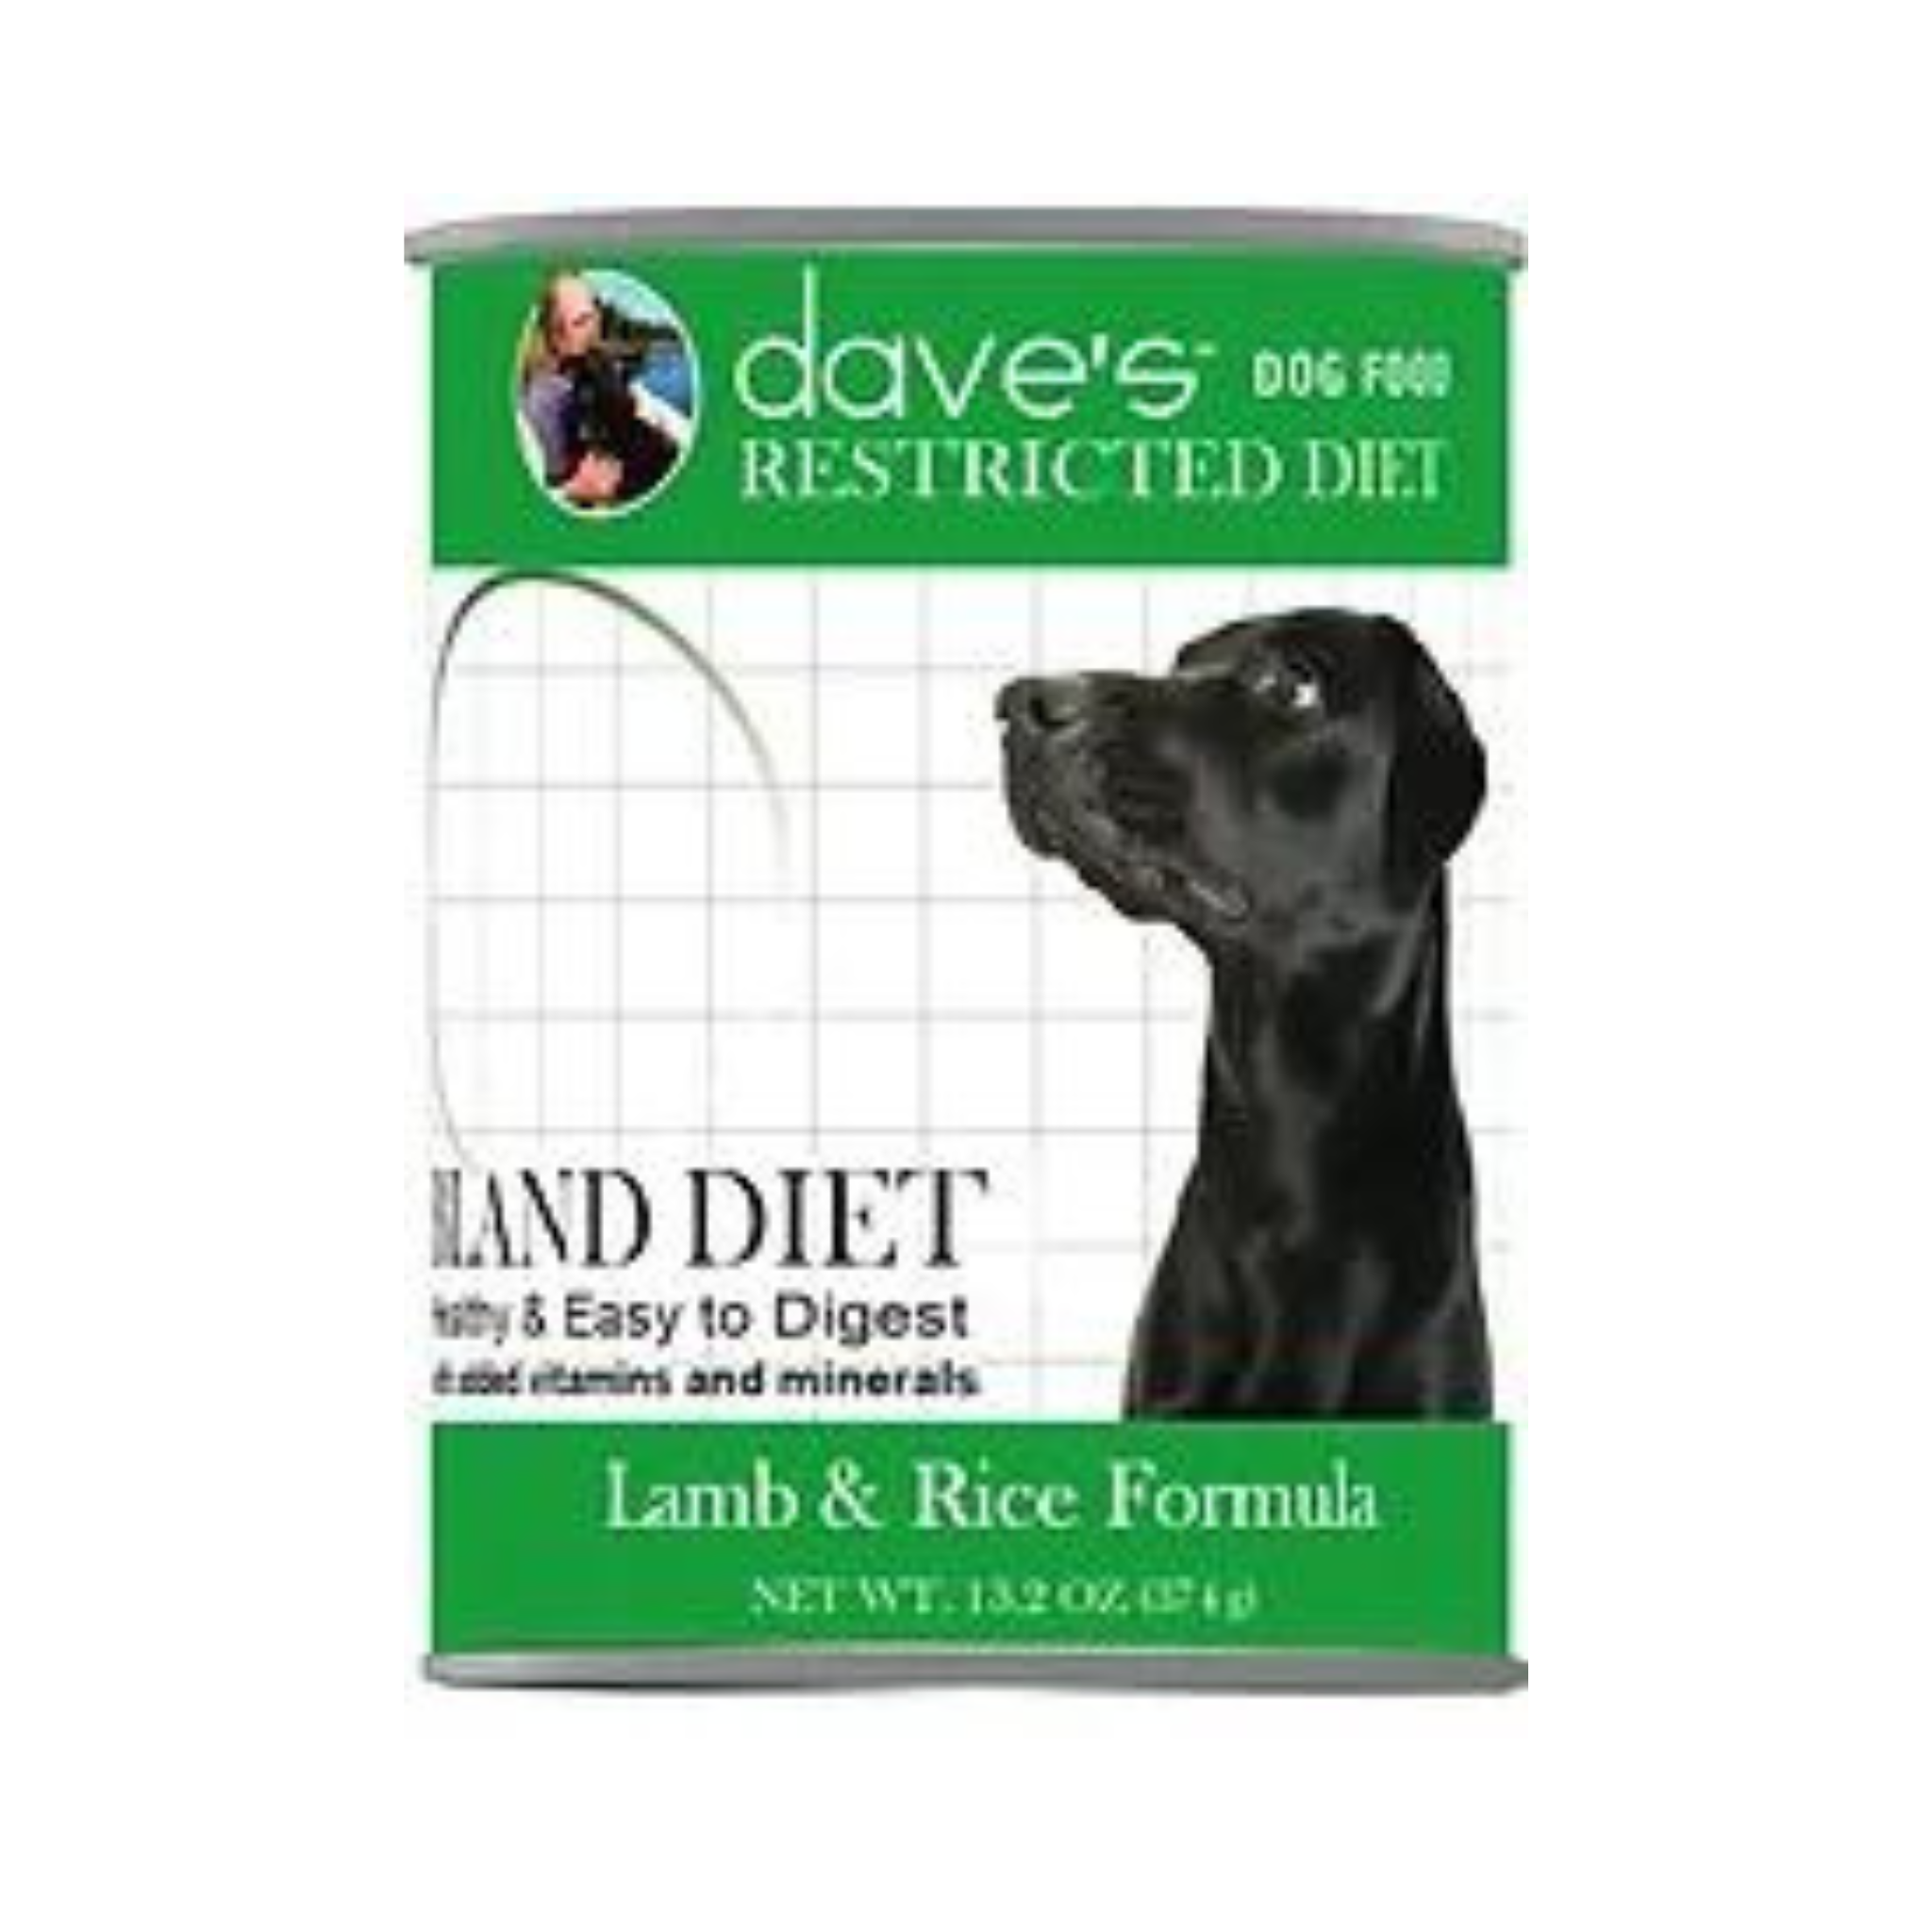 Dave's Restricted Bland Diet Lamb and Rice Dog Canned